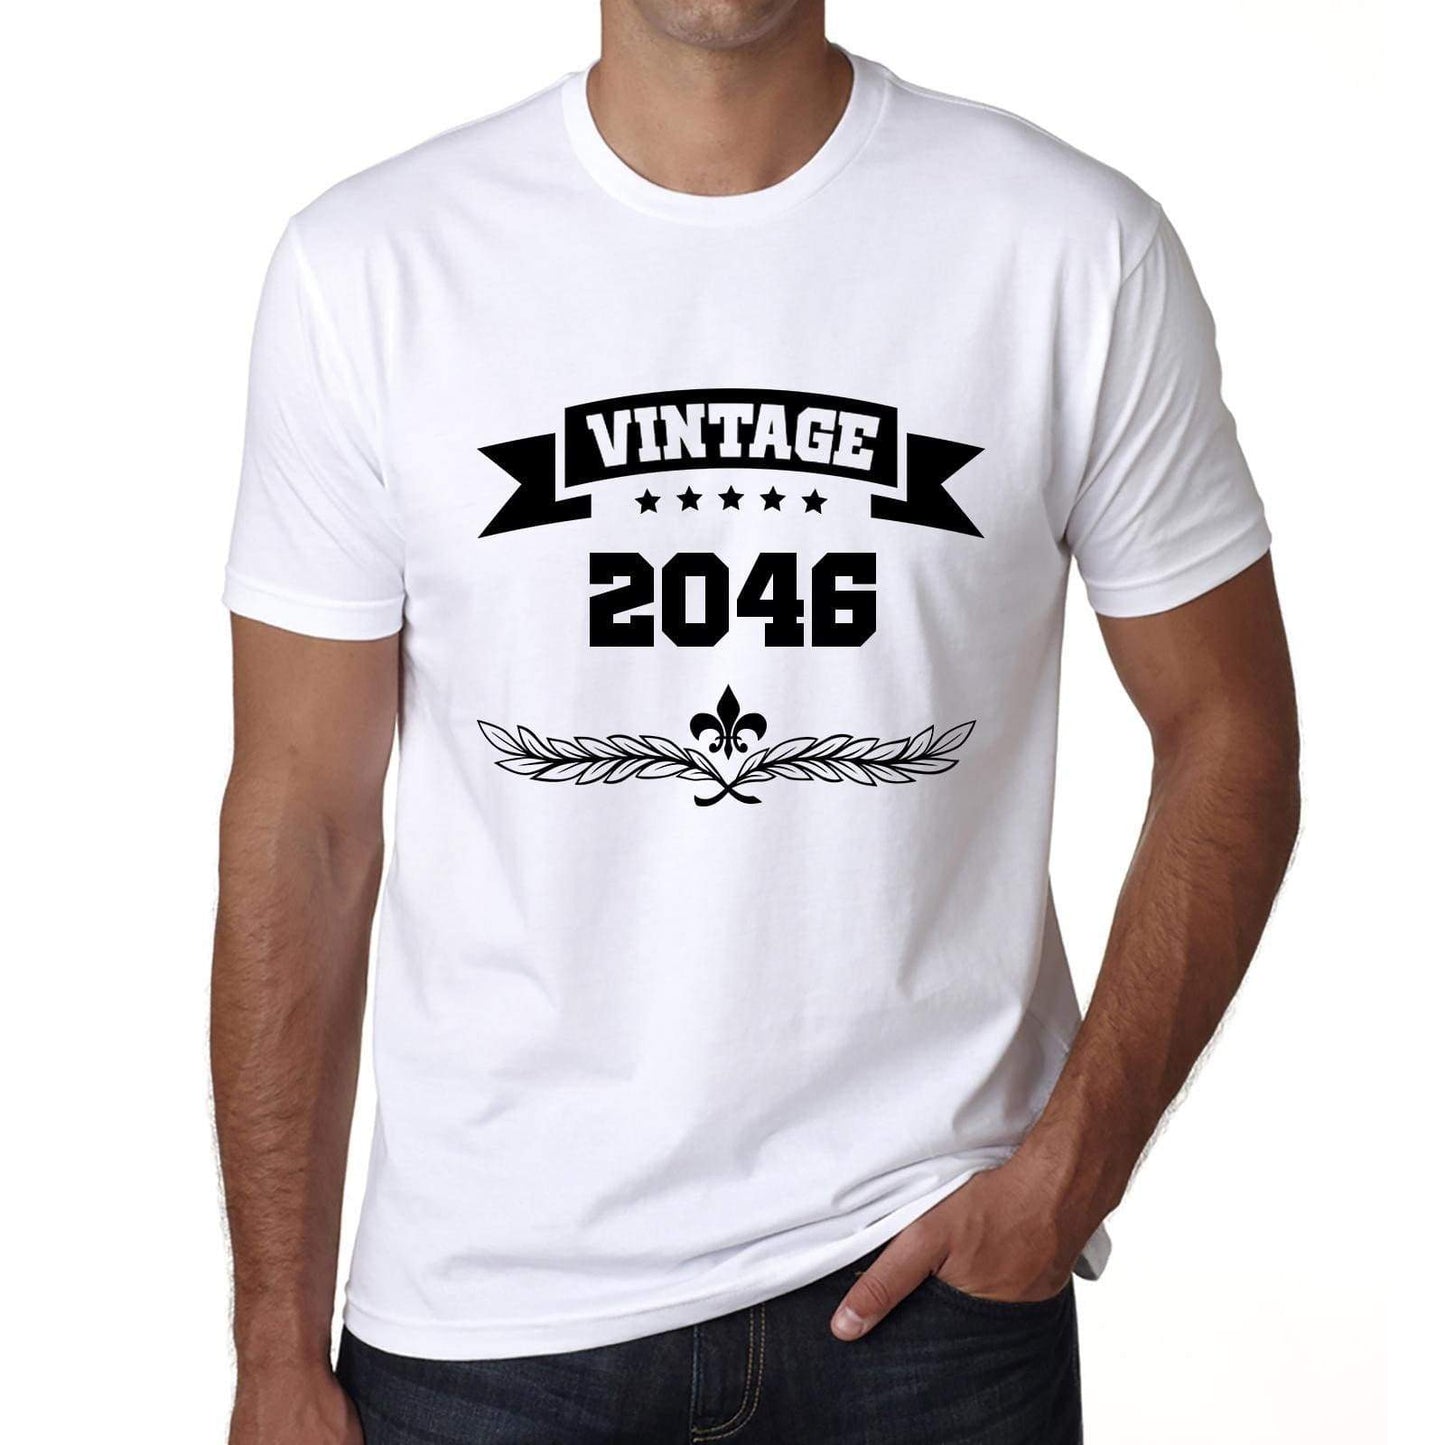 2046 Vintage Year White Mens Short Sleeve Round Neck T-Shirt 00096 - White / S - Casual